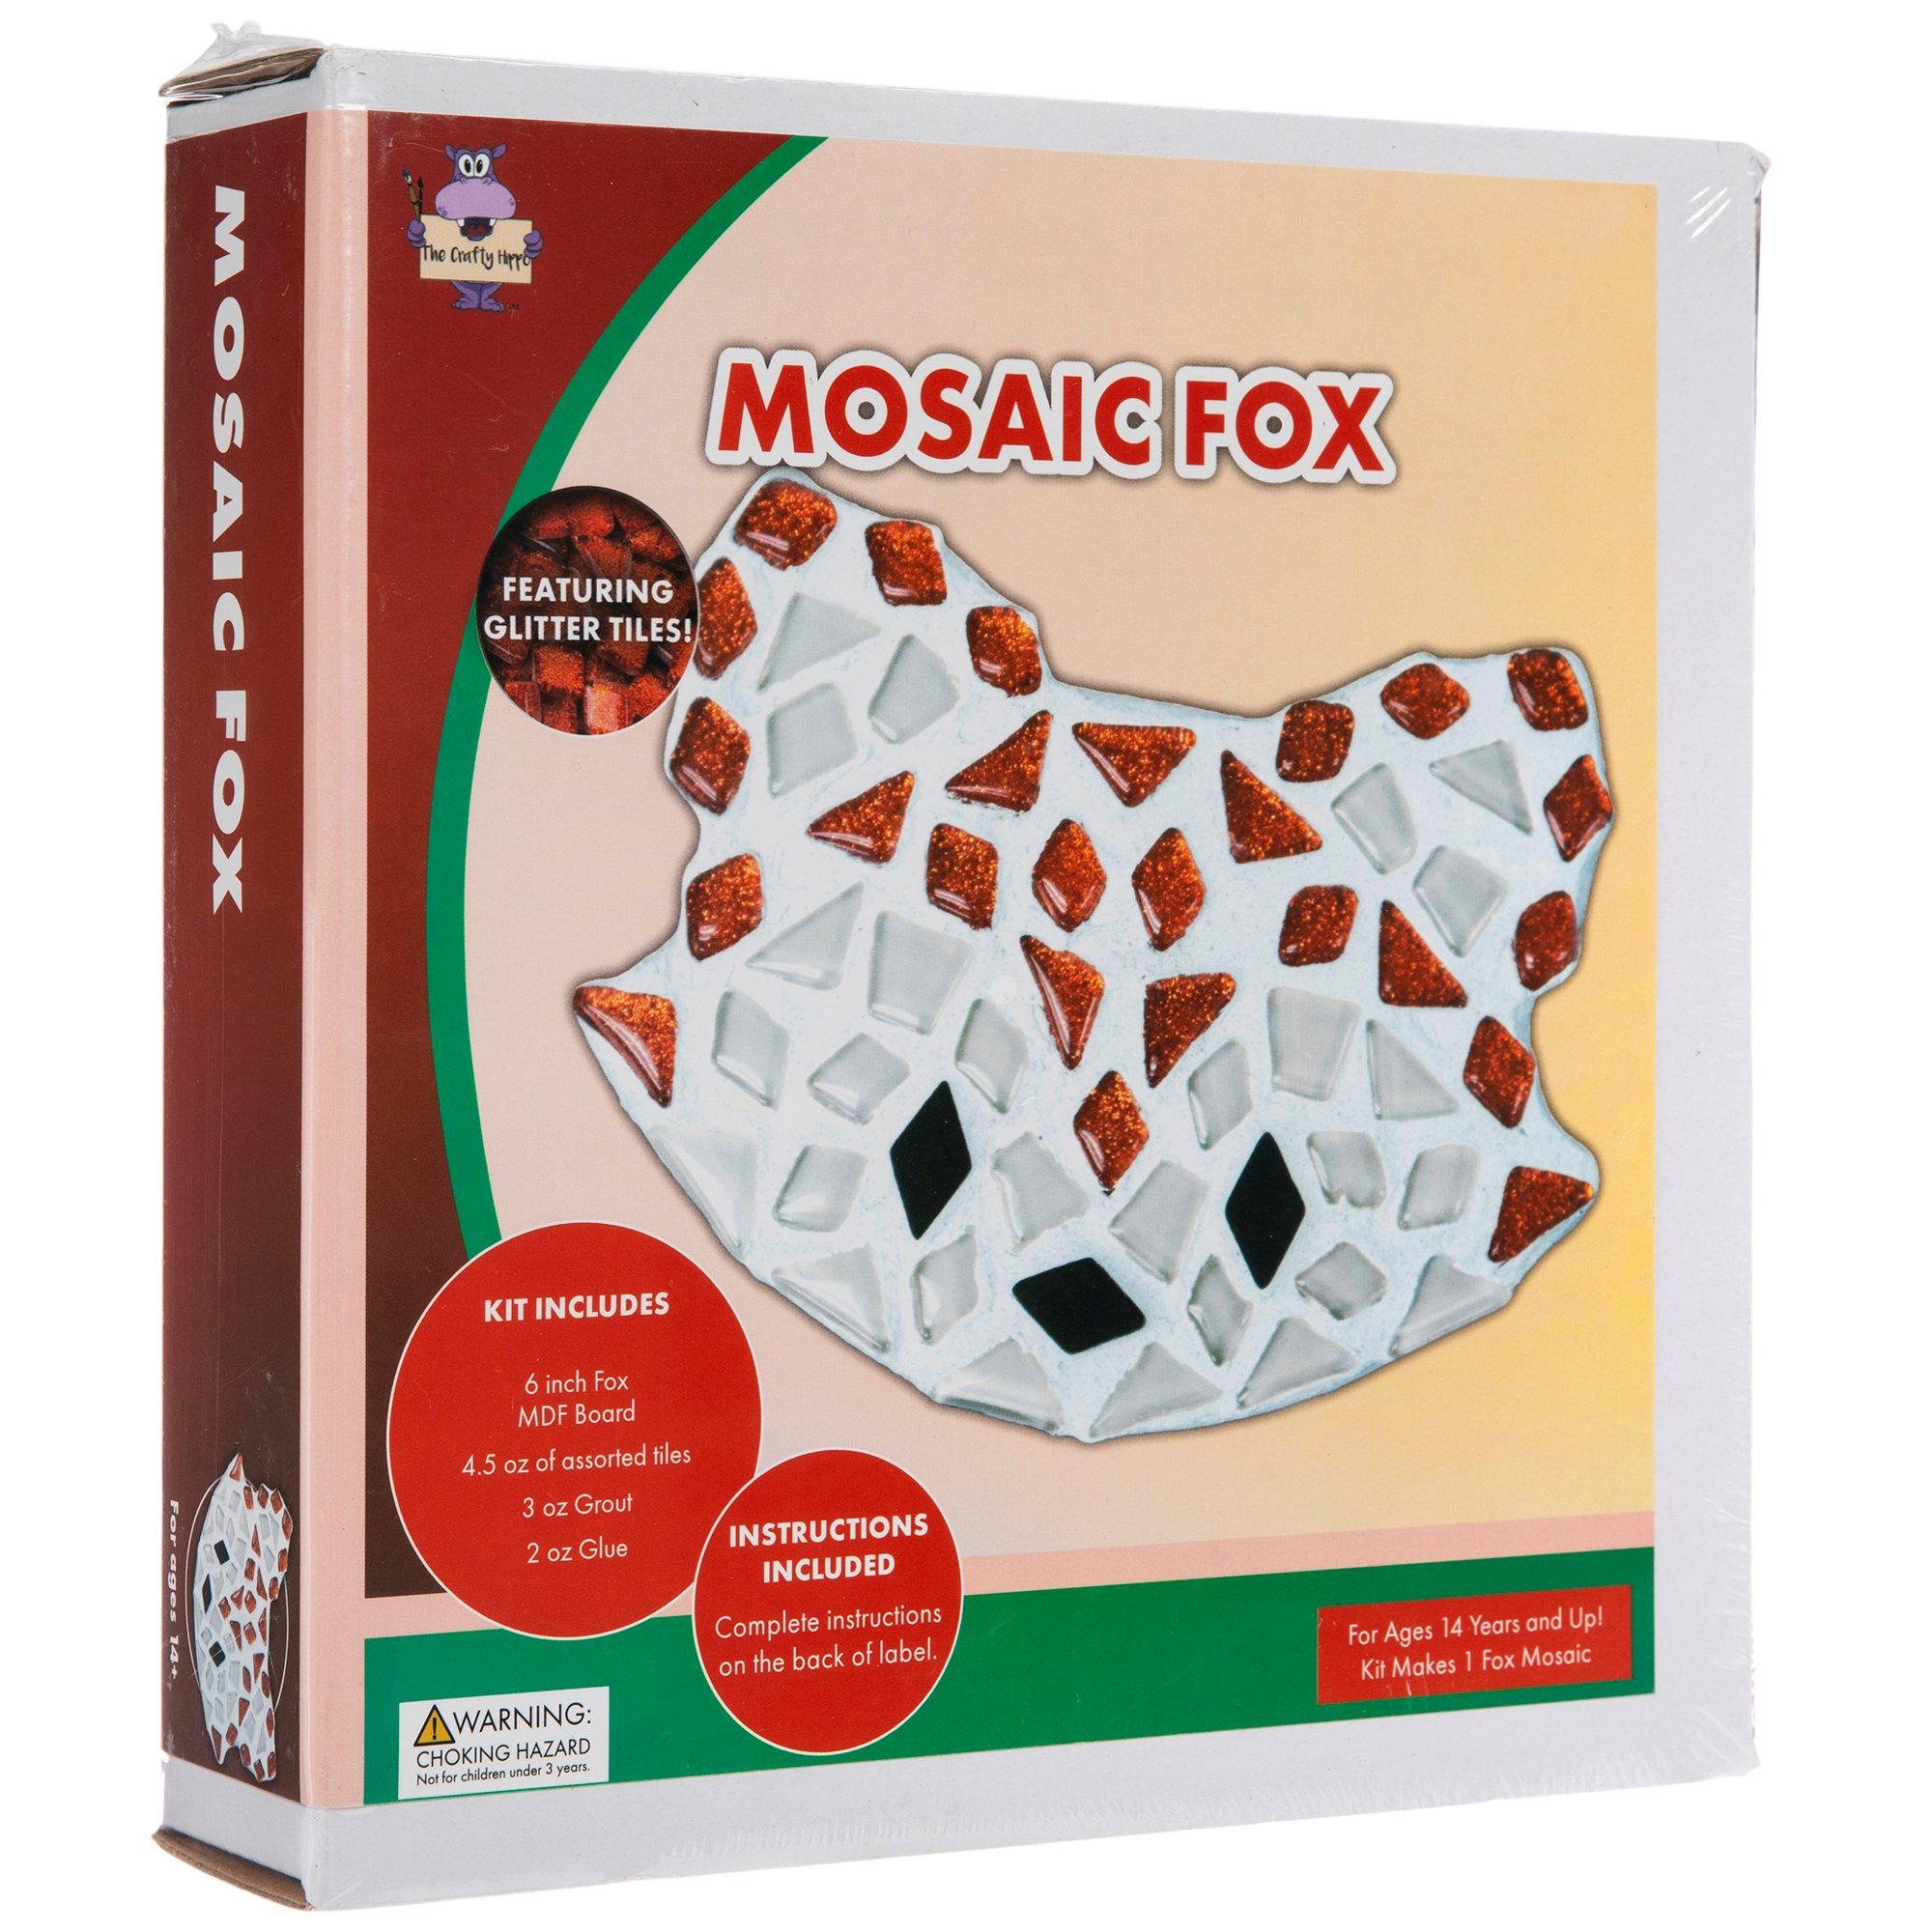 Wildlife FROG Mosaic Kit With Shape, Tiles, Glue, Grout and Instructions to  Make Your Own Interior Mosaic 